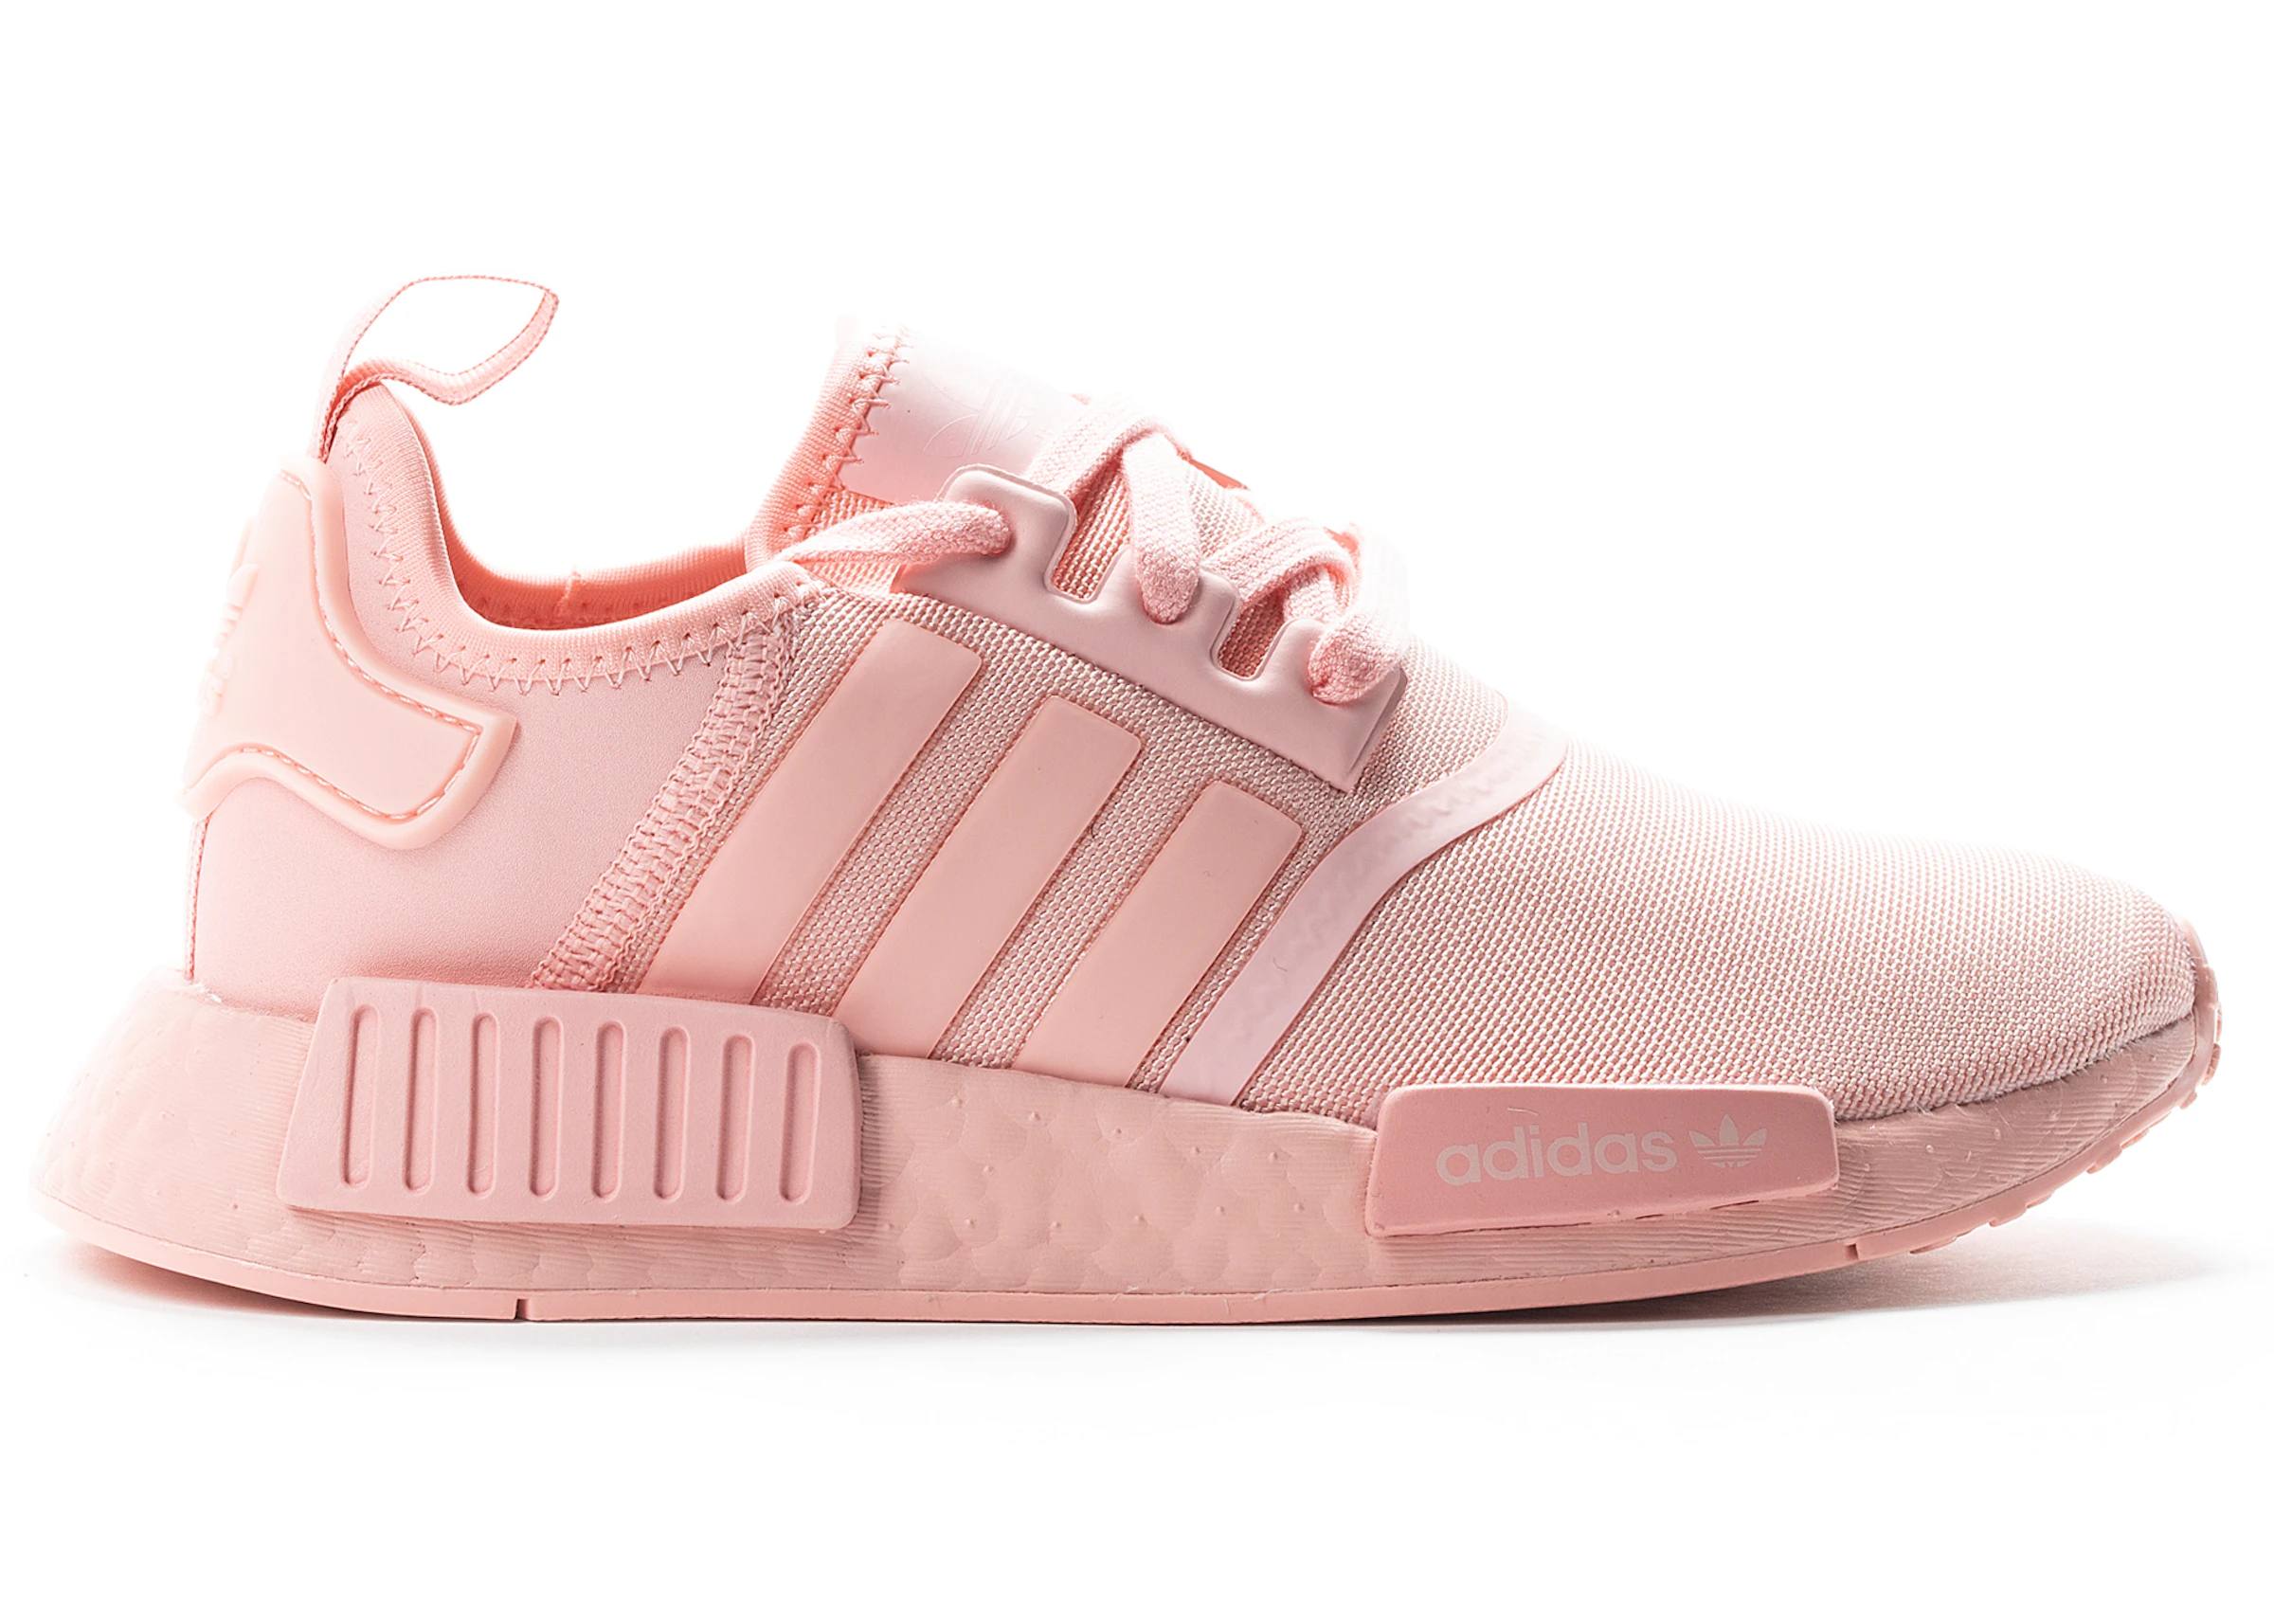 squat Realm painful adidas NMD R1 Glow Pink (Youth) - FW4708 - US